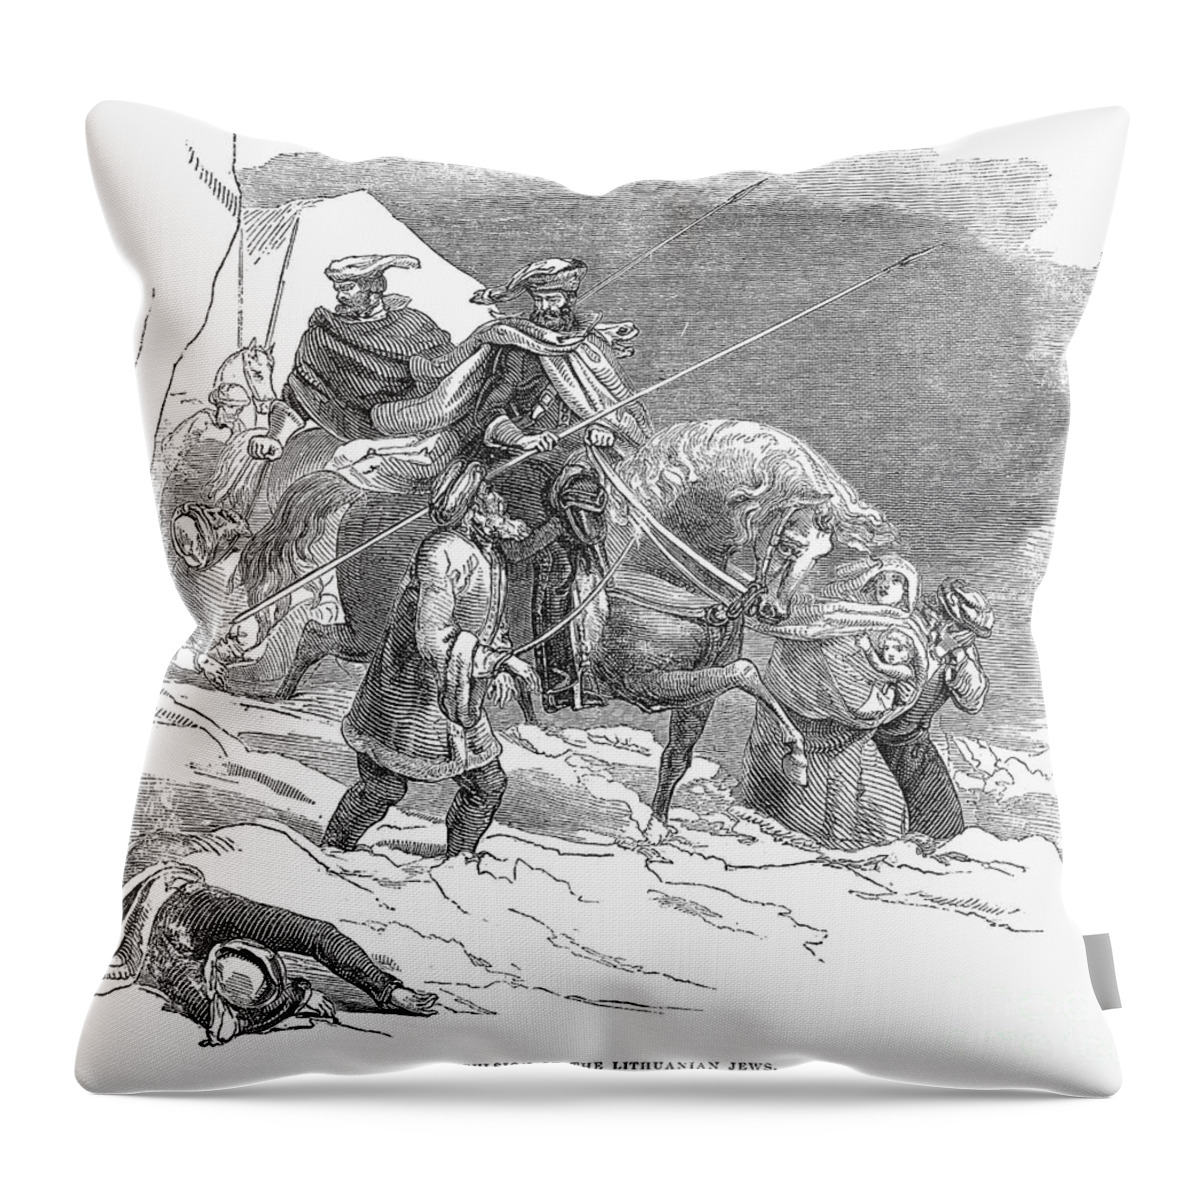 1844 Throw Pillow featuring the photograph Expulsion Of Jews, 1844 by Granger